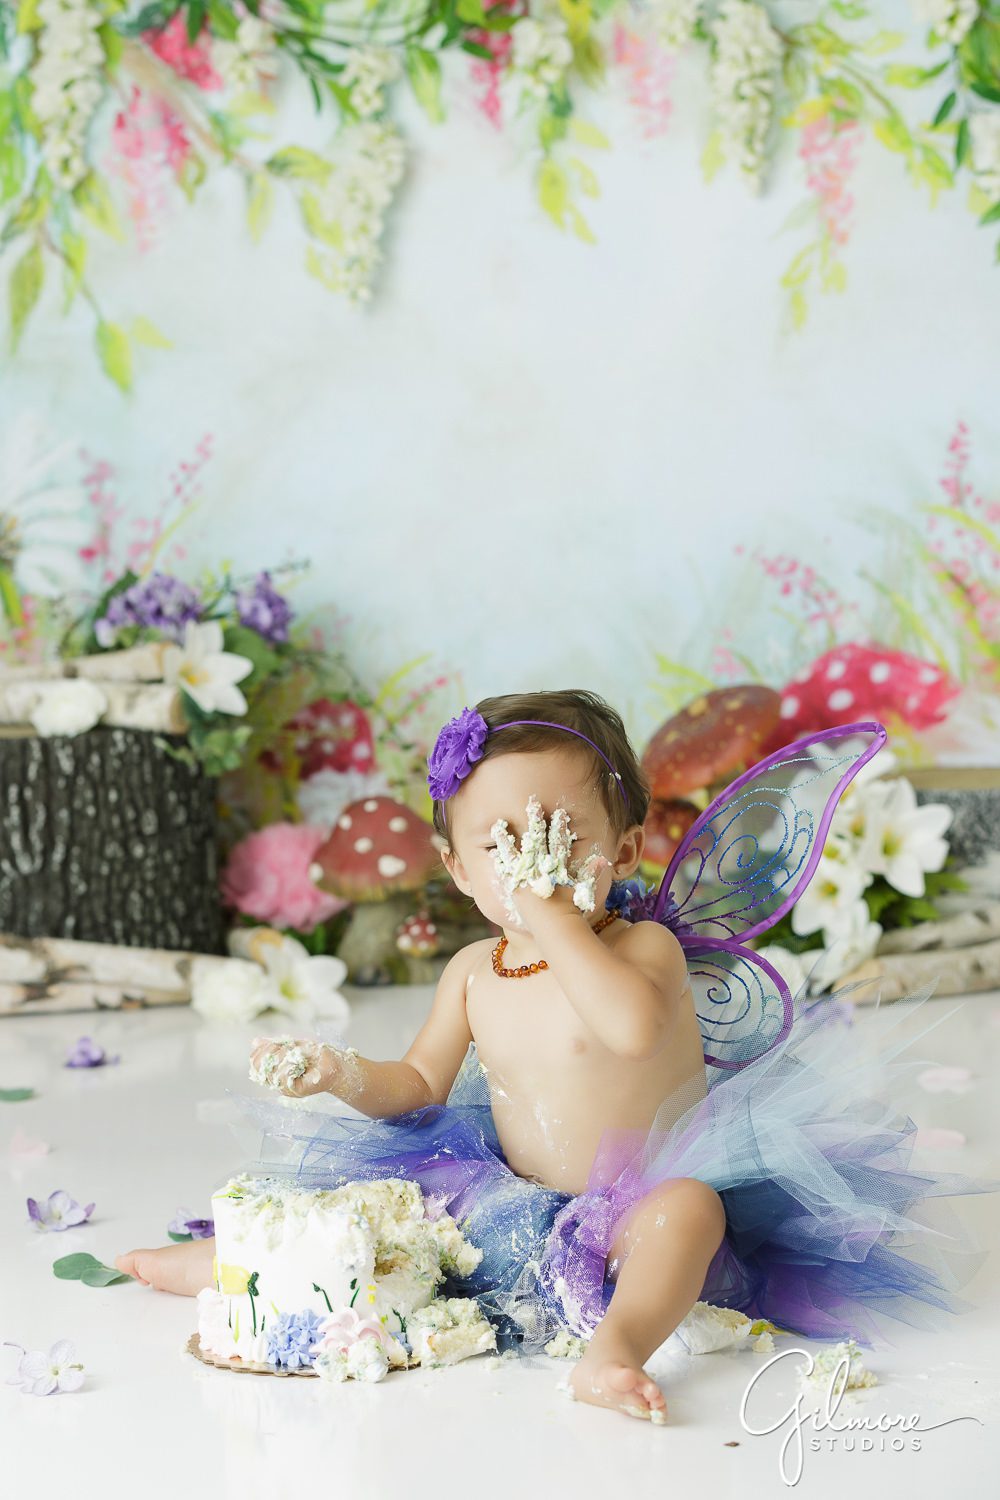 Fairy Cake Smash Session, 1st birthday, one year old, set design, background, prop, girl, dress, french's cupcake bakery